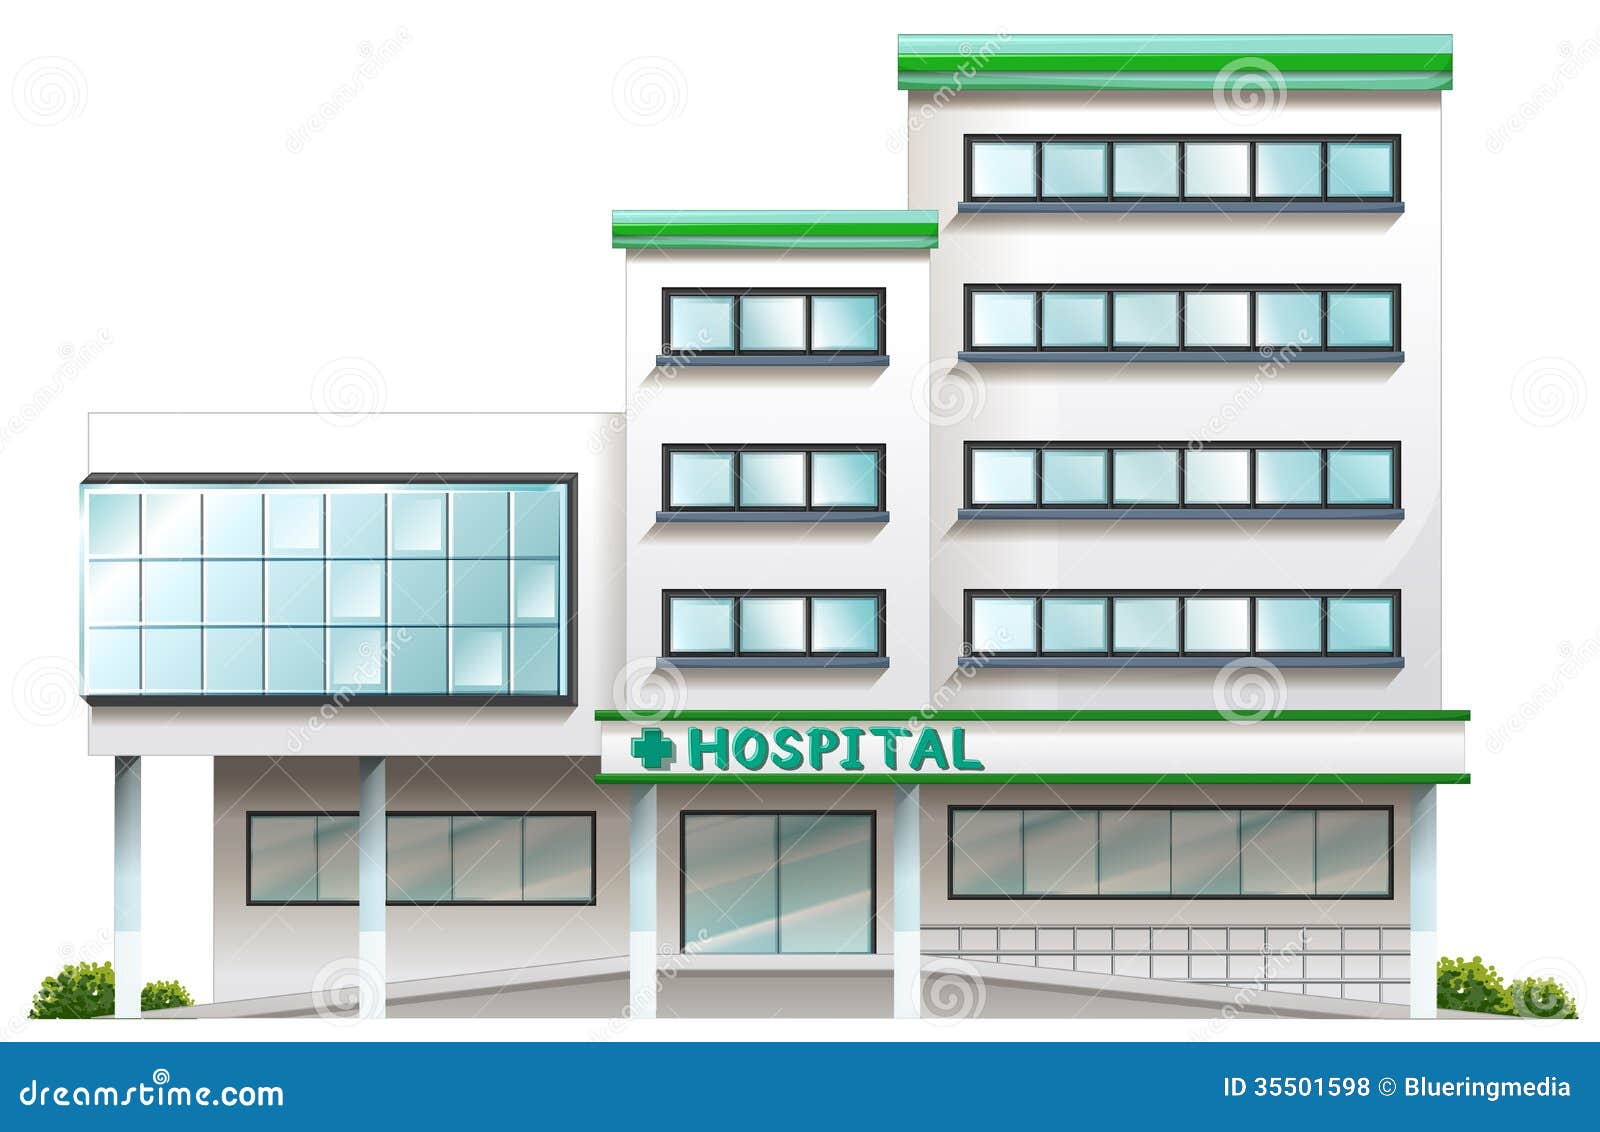 clipart hospital pictures - photo #18